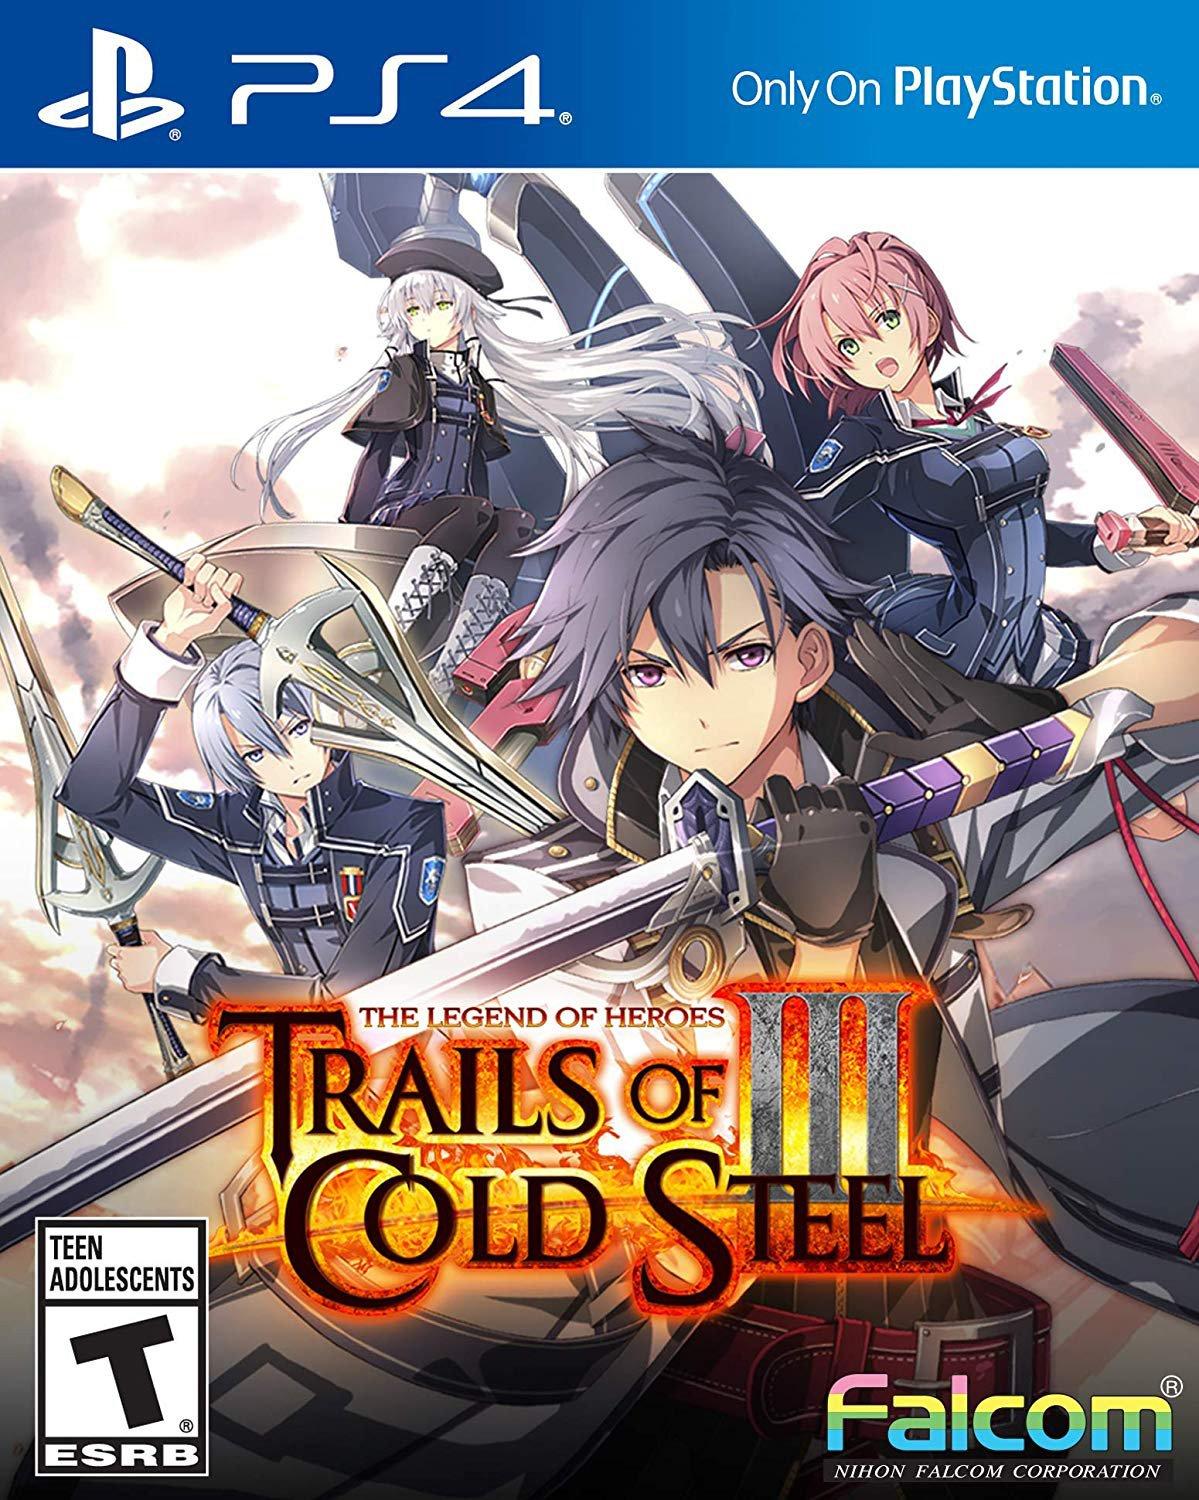 The Legend of Heroes: Trails of Cold III - PlayStation 4 | PlayStation 4 GameStop